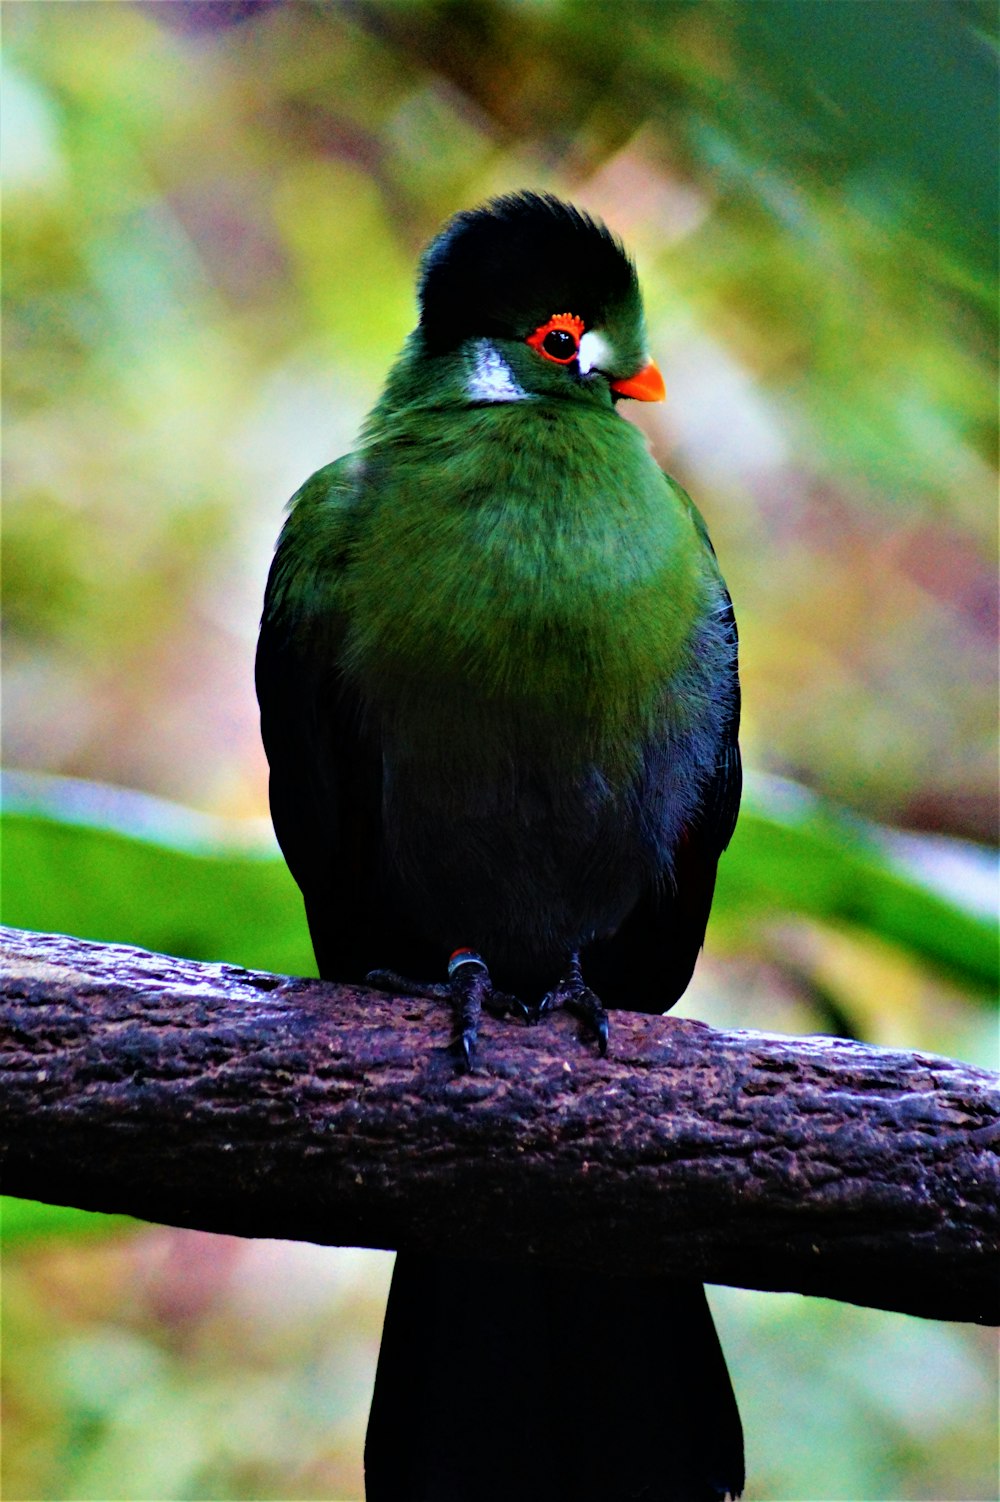 green and black bird on a branch